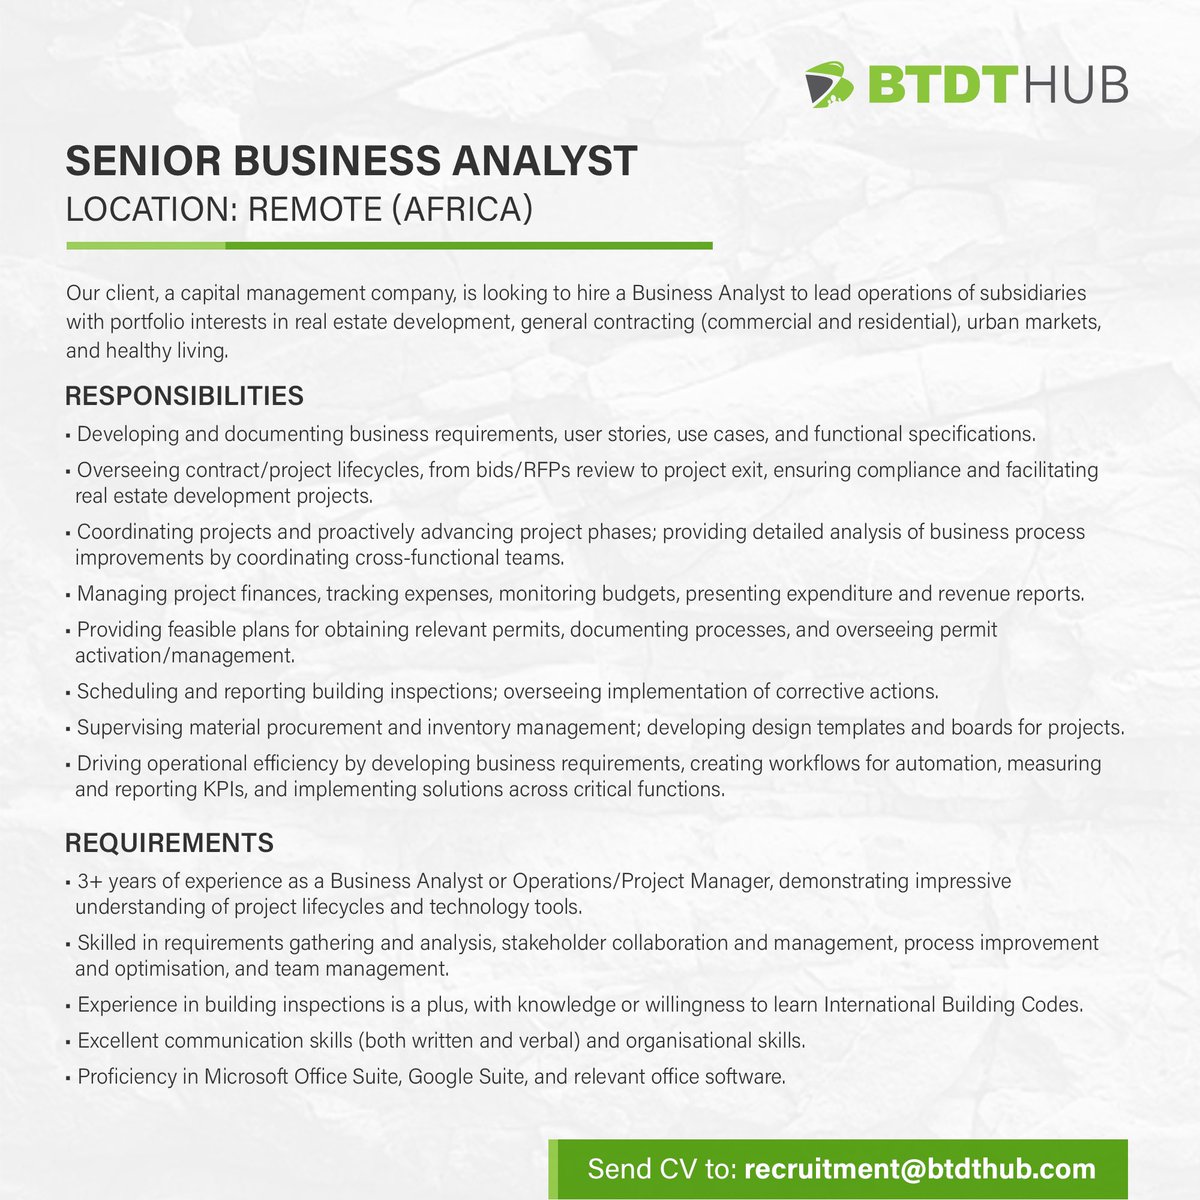 Vacancy Role: Senior Business Analyst Location: Remote Requirement: African Resident with 3+ years of experience as a Business Analyst or Operations/Project Manager Qualified? Send your CV to RECRUITMENT@BTDTHUB.COM #BTDTHub